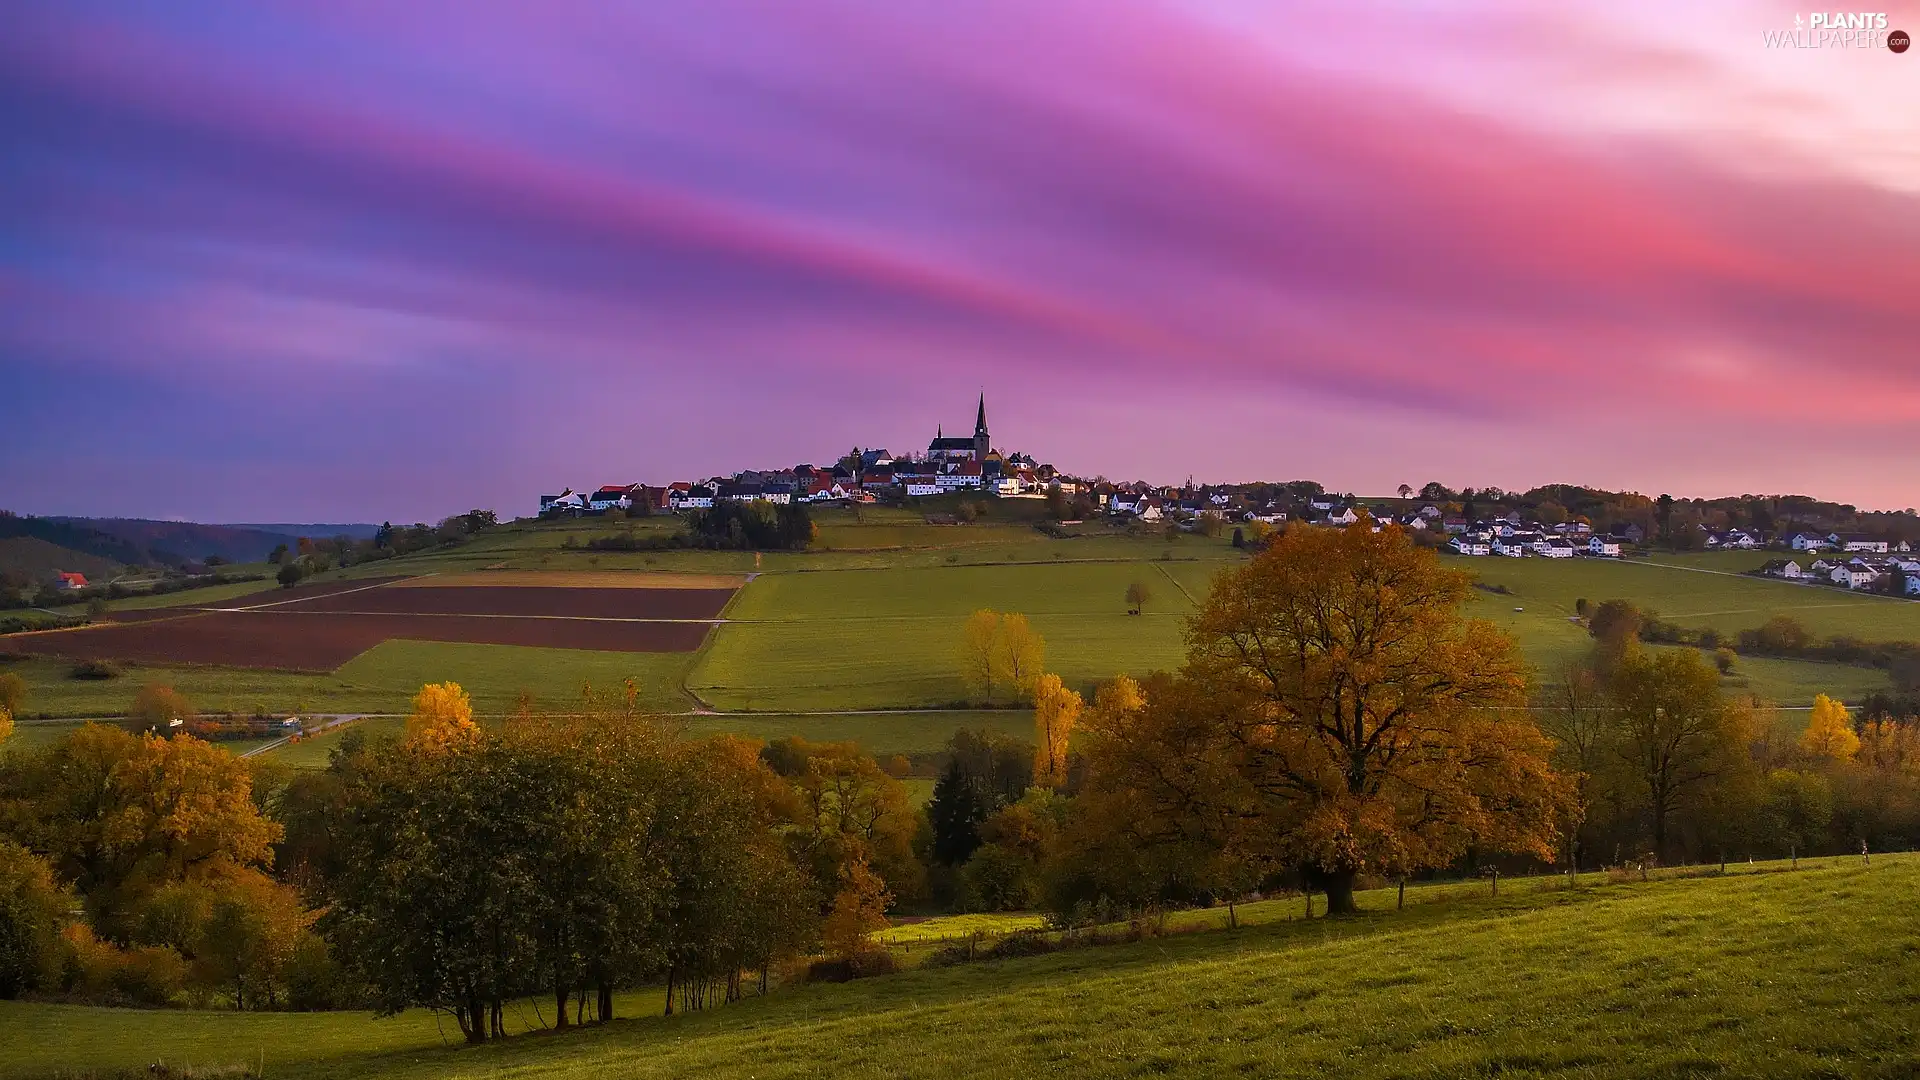 field, medows, Church, trees, buildings, country, Great Sunsets, viewes